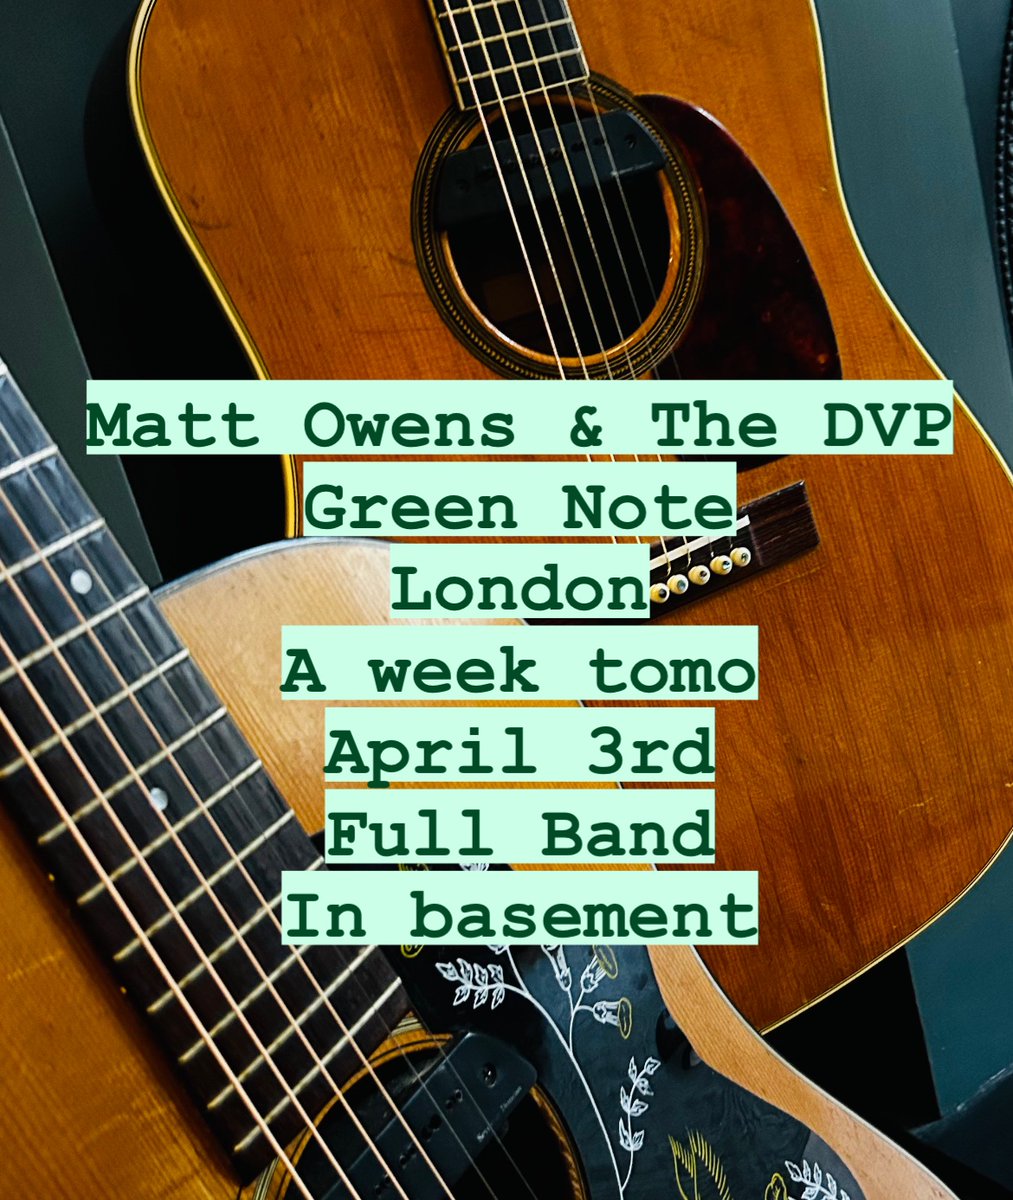 A week tomo myself & The DVP are playing a 2 hour, full-band acoustic set @GreenNote tix : greennote.co.uk/production/mat… 8pm @americanaUK @AtTheHelmPR @SongwritingMag @uncutmagazine @soundloungeCIC @leader_music @RobertElms @BBCLondonNews #gigs @TheAMAUK @ClassicRockMag #newmusic